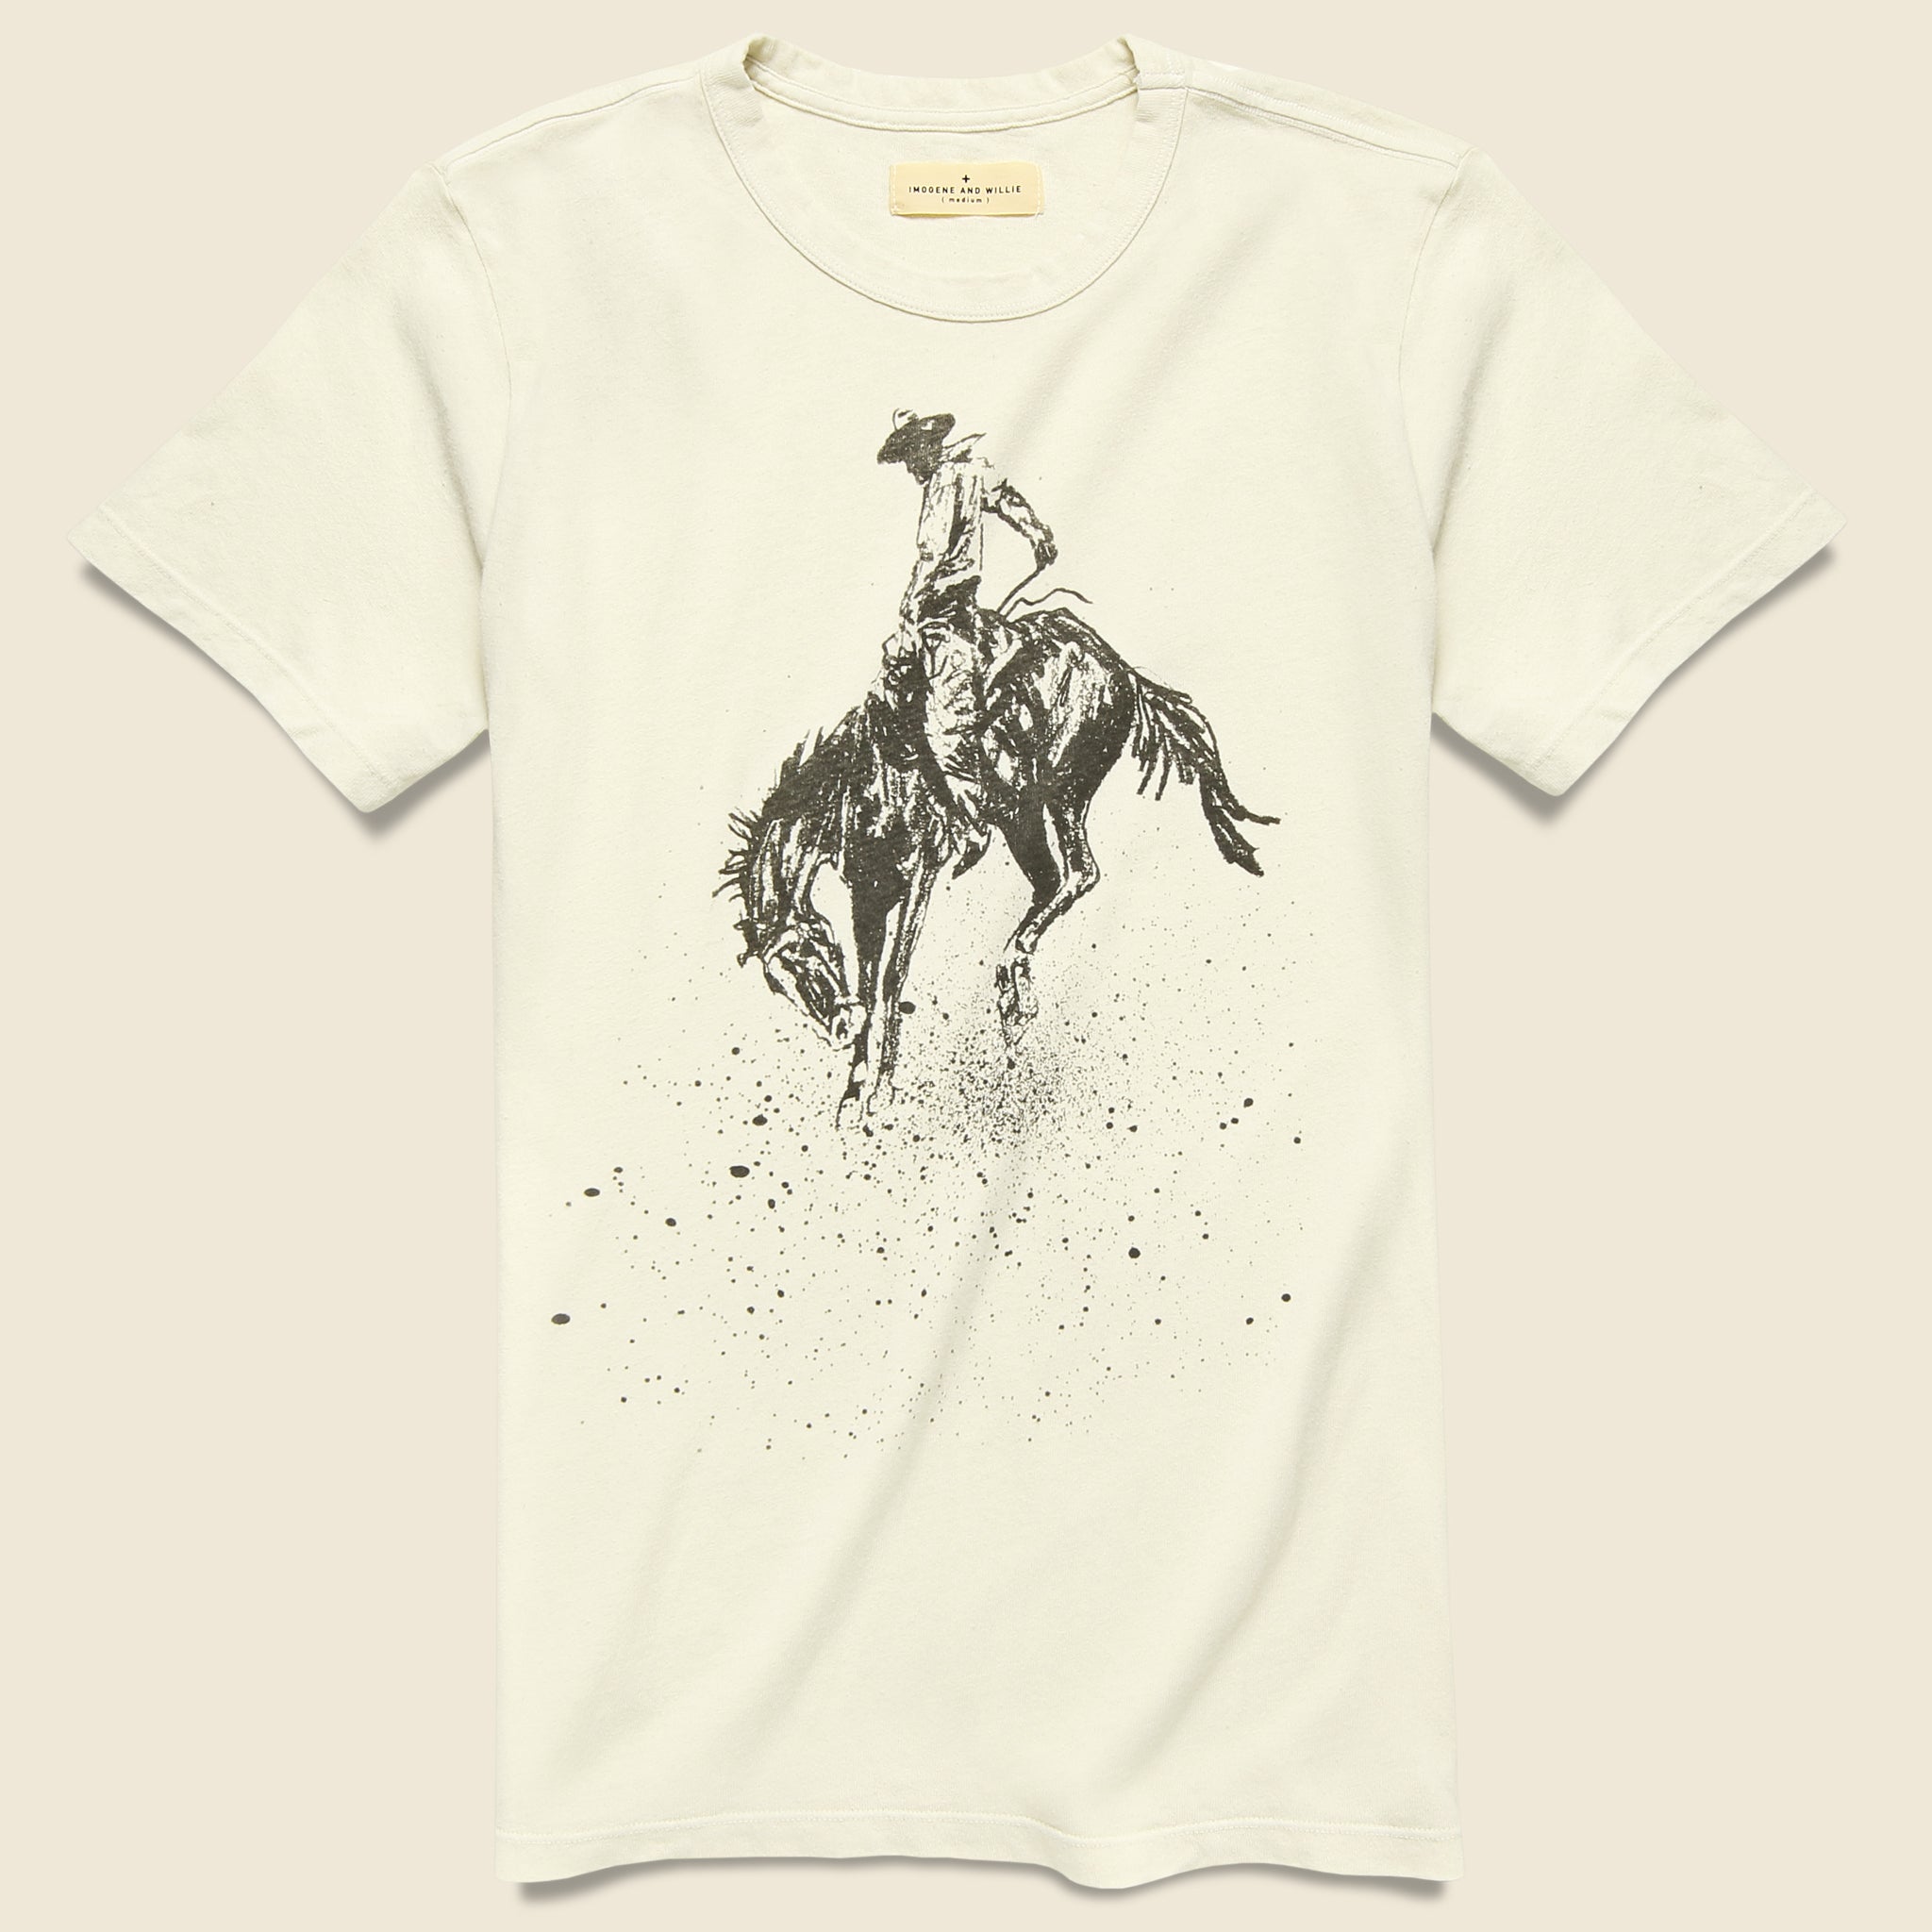 Buckin' Bronco Tee - Vintage White - Imogene + Willie - STAG Provisions - Tops - S/S Tee - Graphic